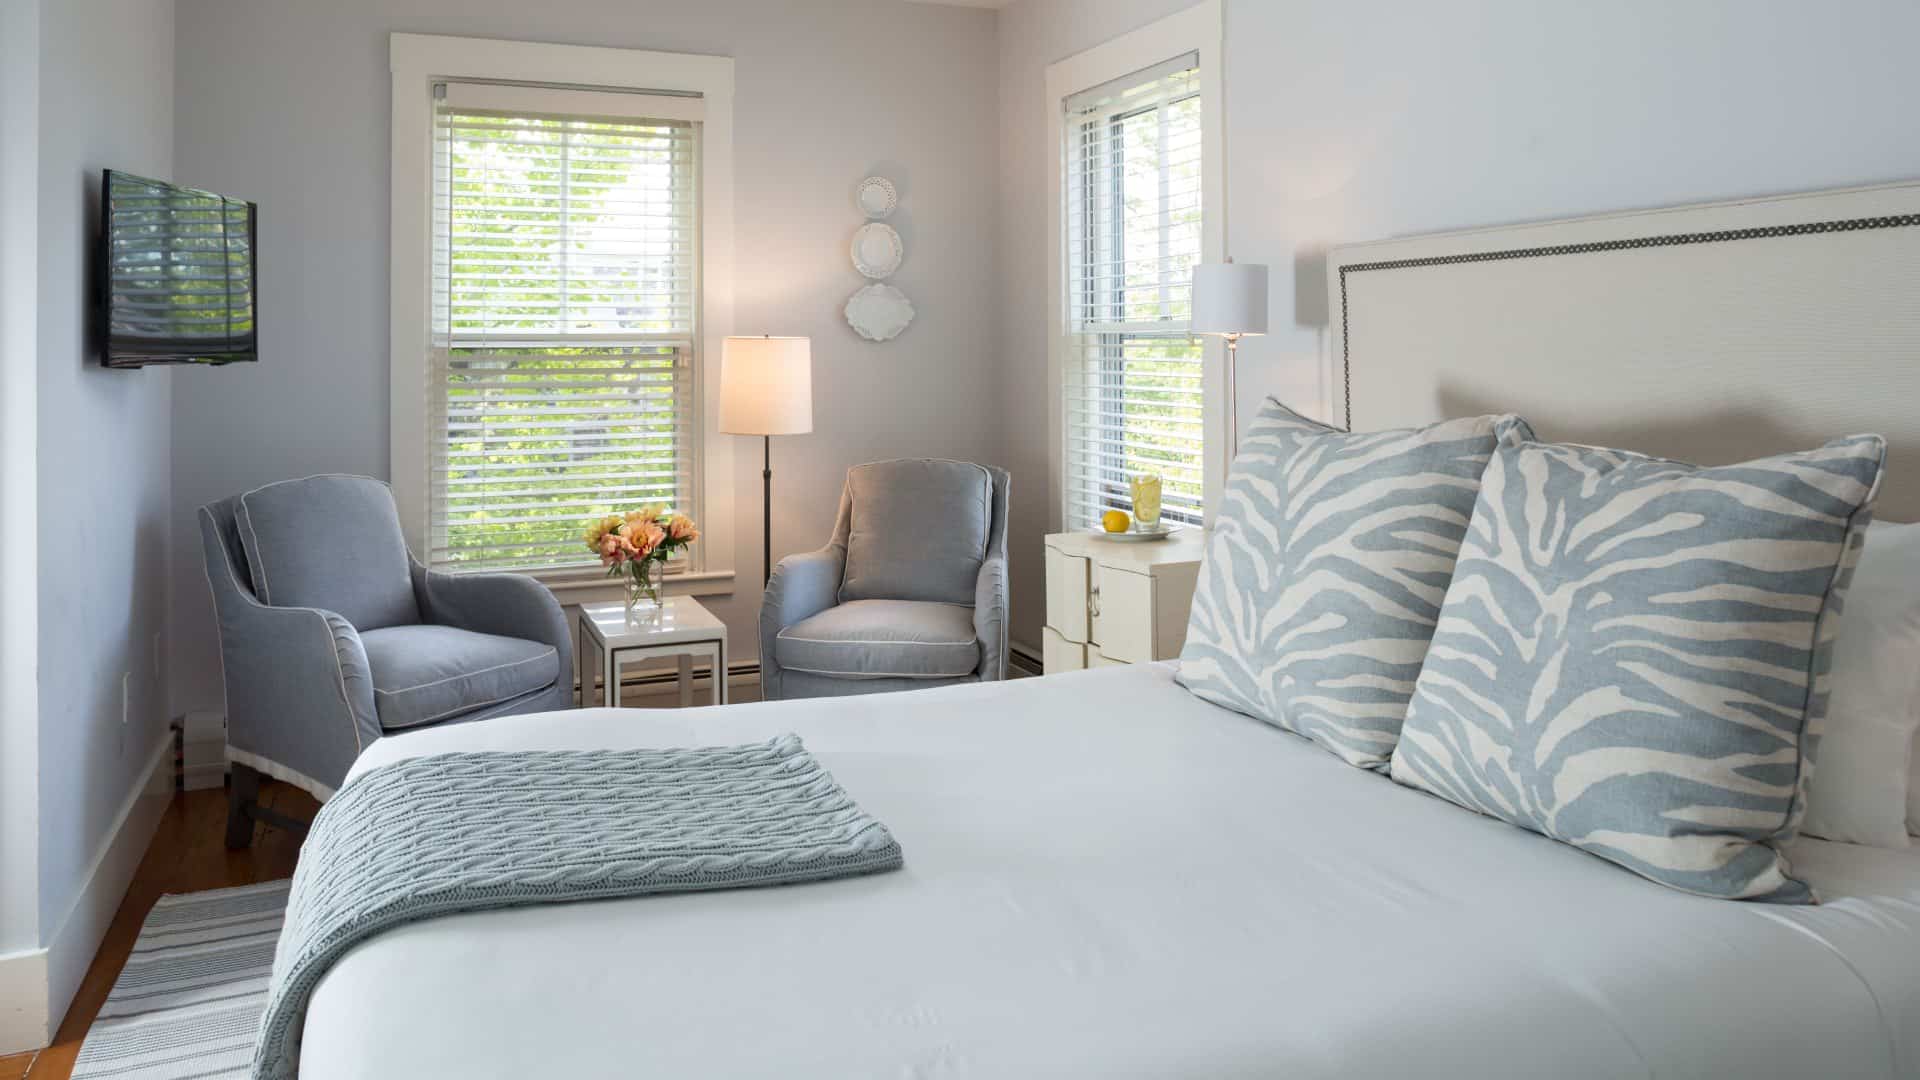 Bedroom with wooden flooring, light colored walls, white upholstered headboard, white bedding, and sitting area with two light gray upholstered chairs